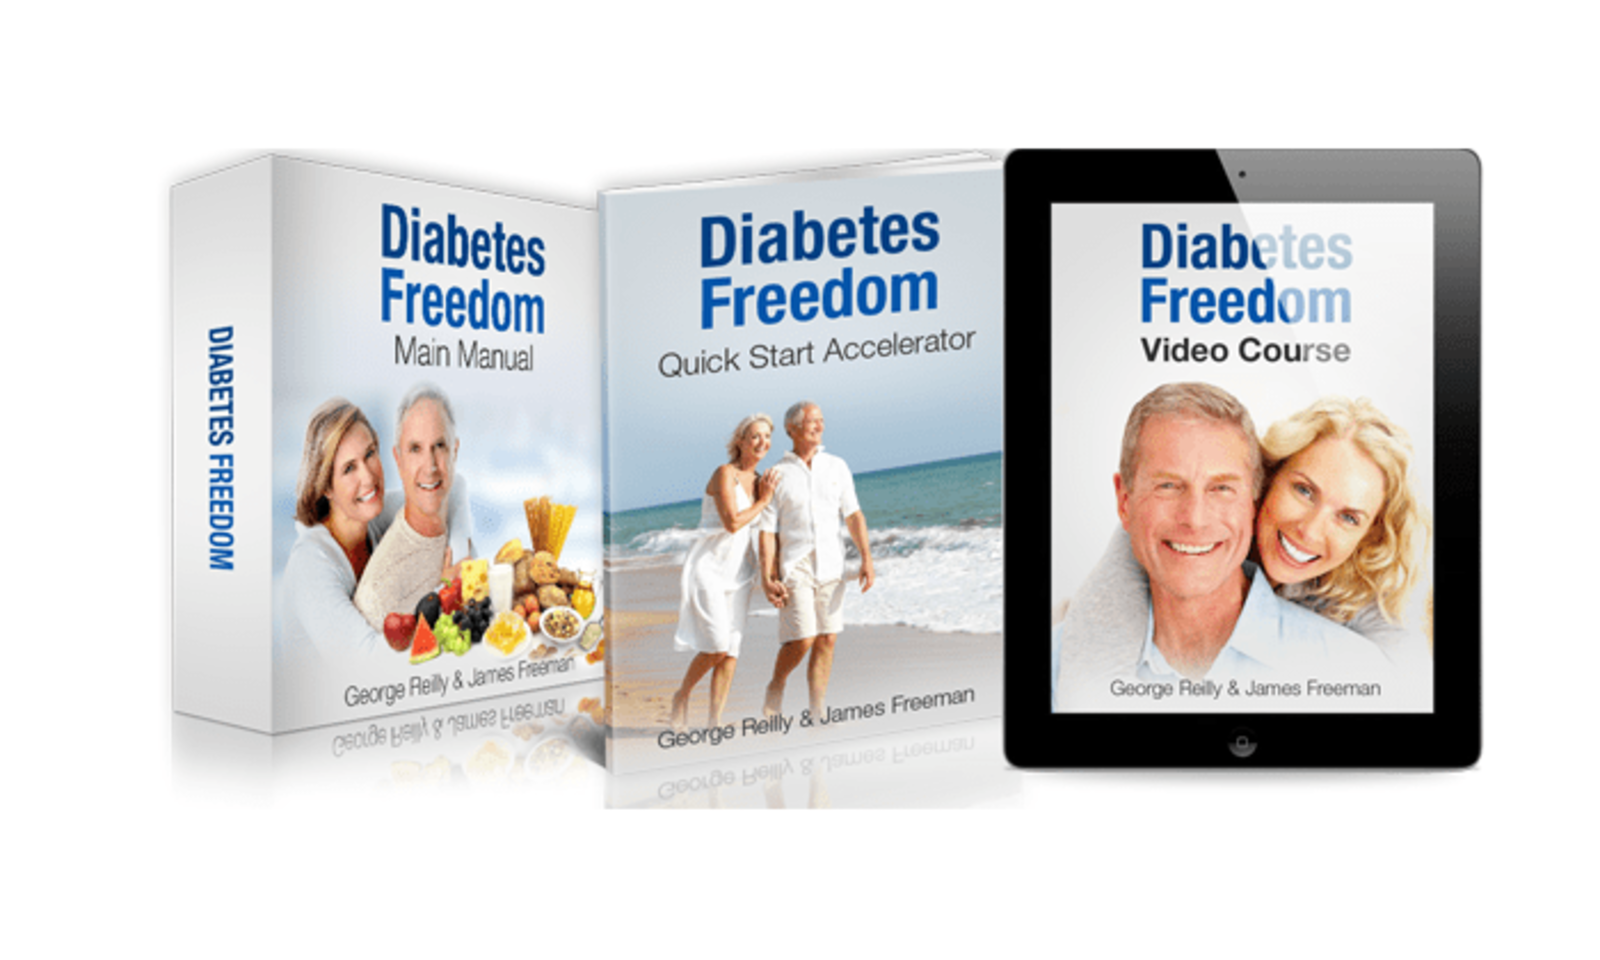 Diabetes Freedom The program is created based on research at the University of Utah, Texa University, Newcastle University in England, and Harvard Medical School.